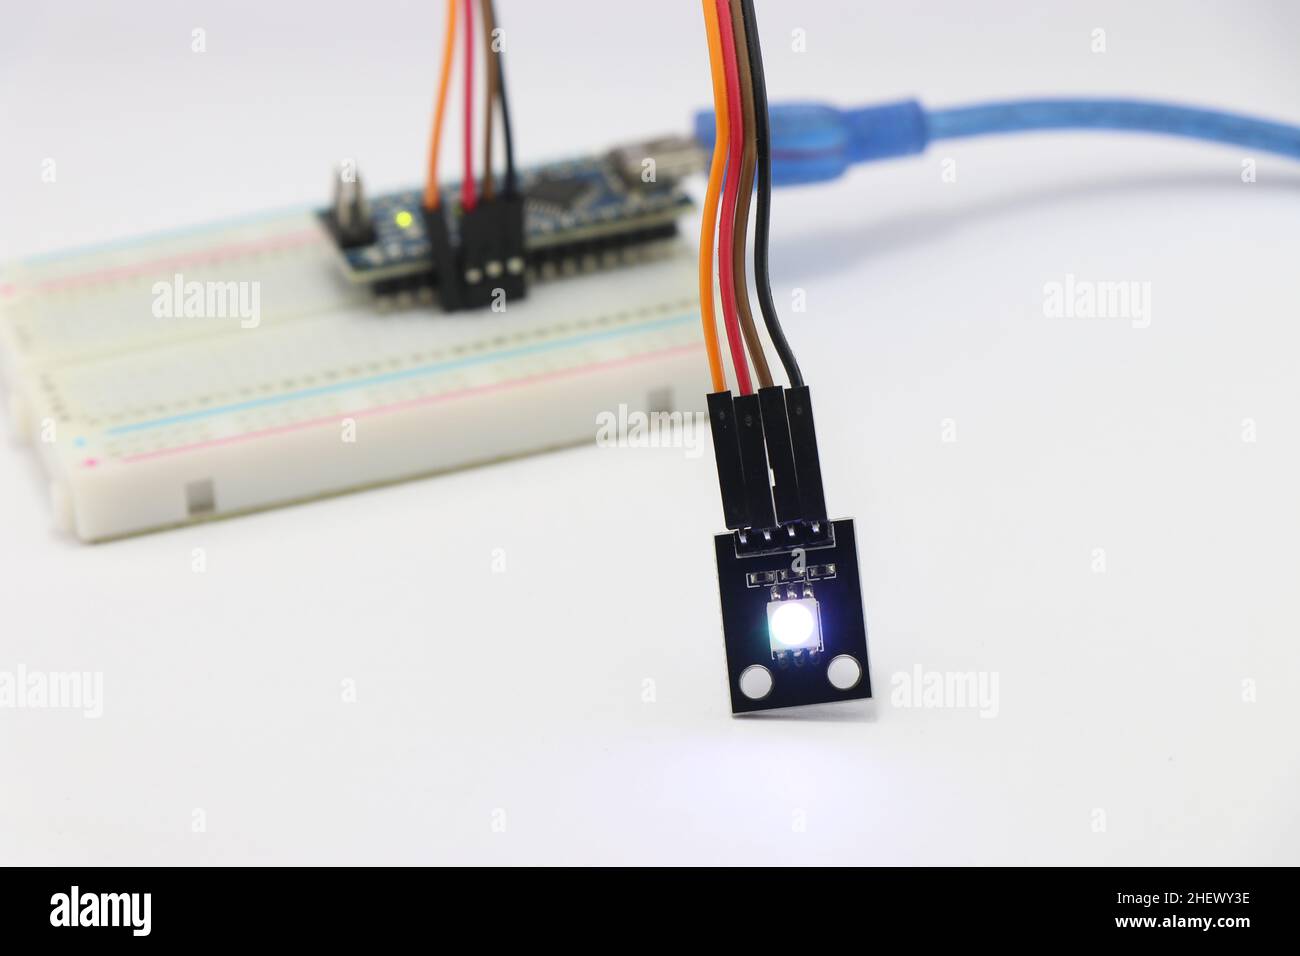 ARGB LED module connected to the breadboard using jumper wires, Various electronic parts combined to make amazing science projects Stock Photo